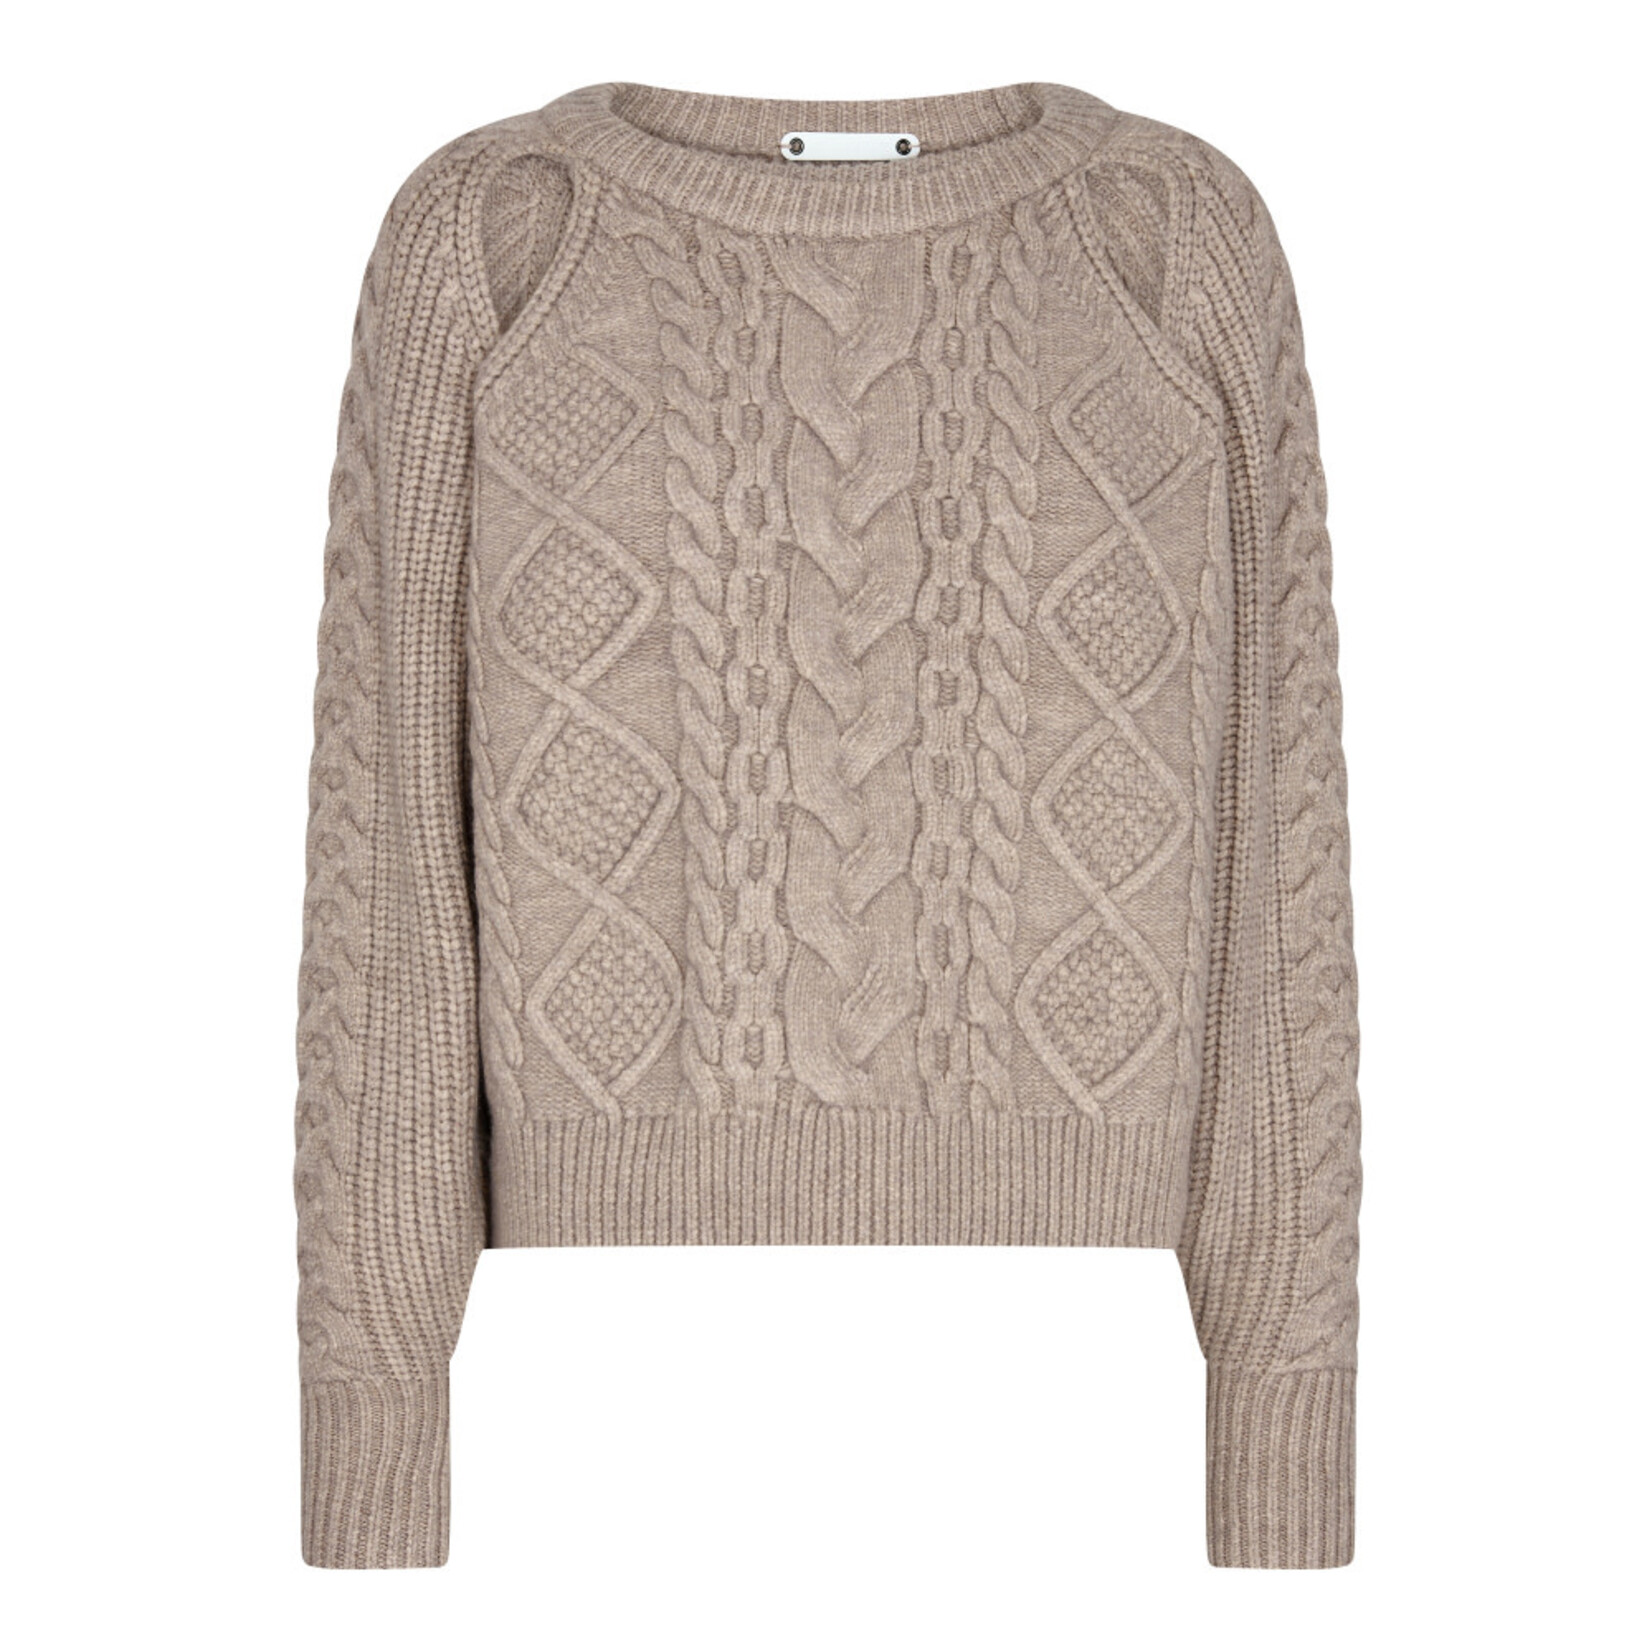 Co'couture New row cable knit Champagne